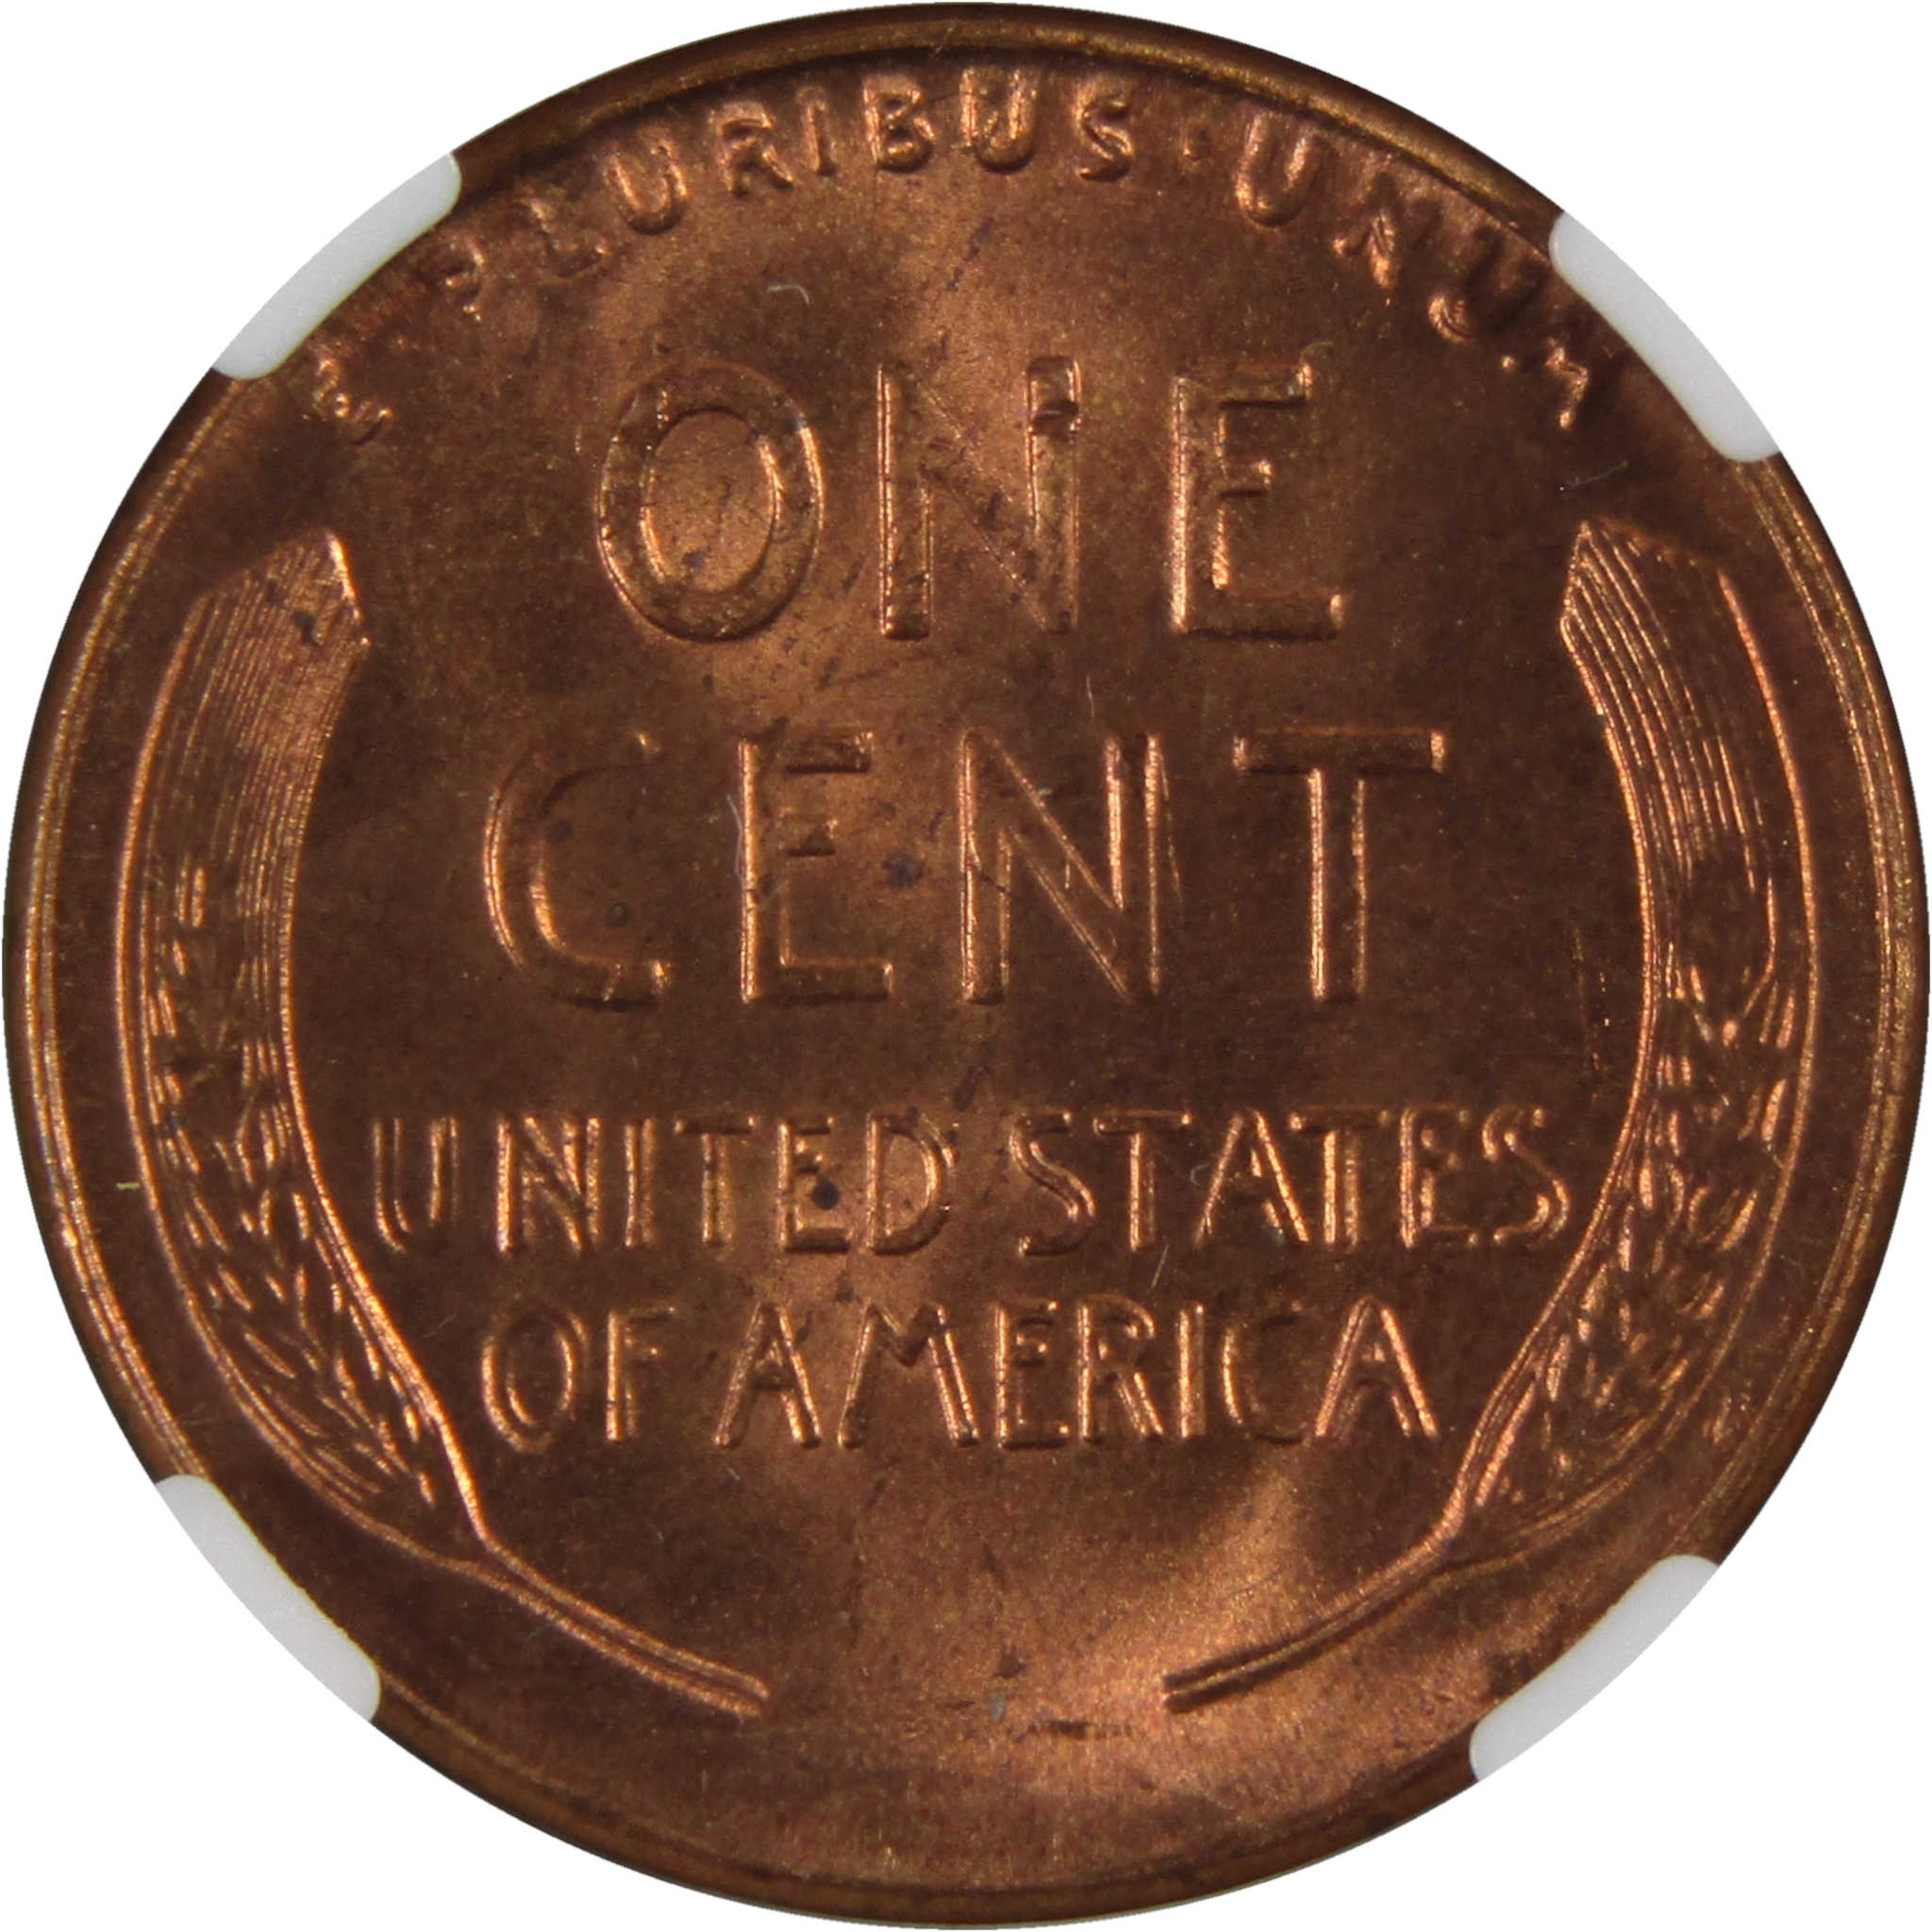 1955 Lincoln Wheat Cent MS 66 RD NGC Penny 1c Uncirculated SKU:I3641